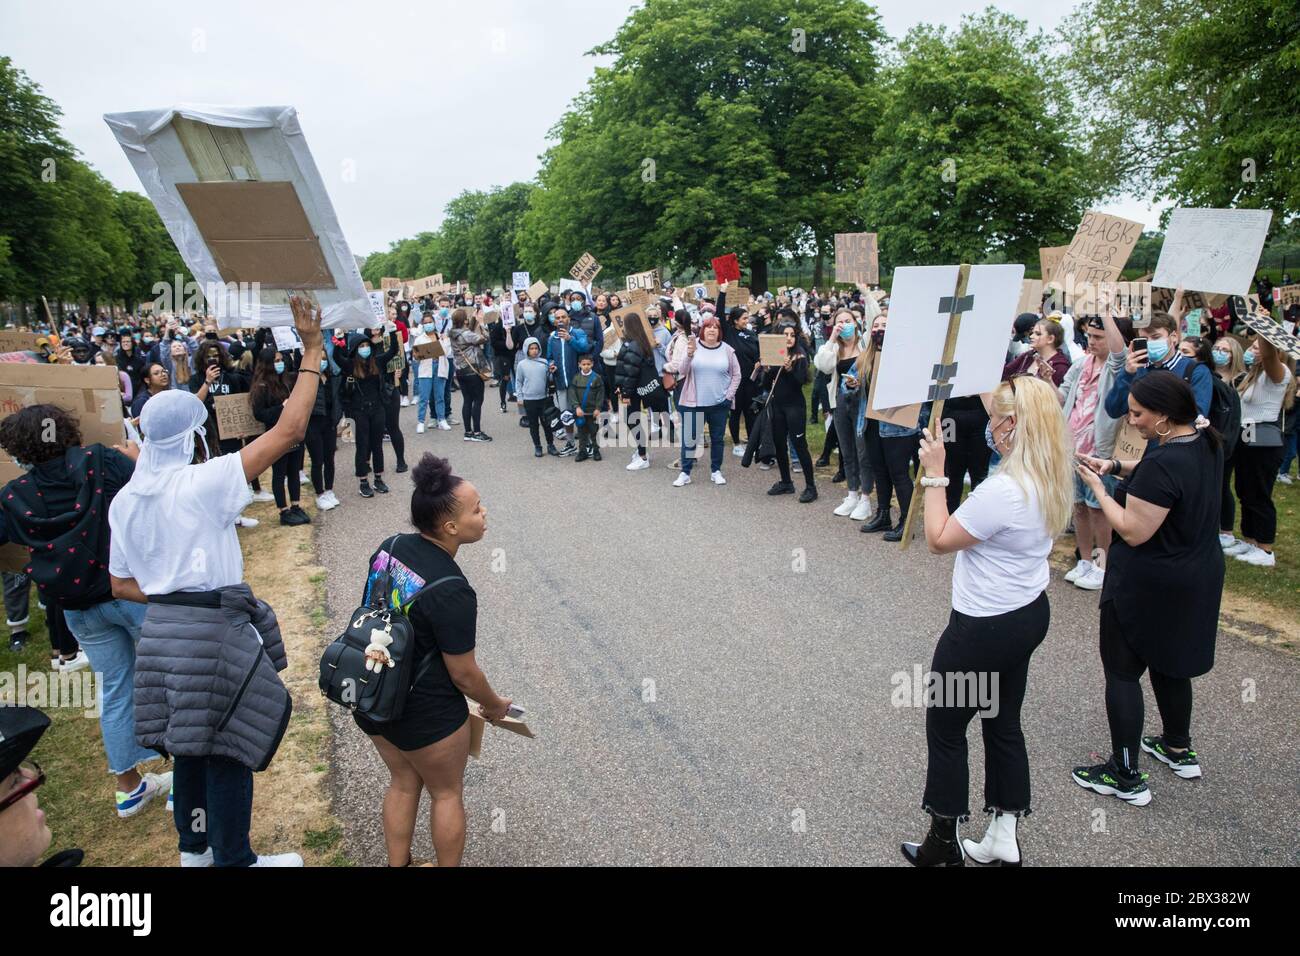 Windsor, UK. 4 June, 2020.  Hundreds of young people take part in a peaceful protest march along the Long Walk in front of Windsor Castle in solidarity with the Black Lives Matter movement. The march was organised at short notice by Jessica Christie at the request of her daughter Yani, aged 12, following the death of George Floyd while in the custody of police officers in Minneapolis in the United States. Credit: Mark Kerrison/Alamy Live News Stock Photo